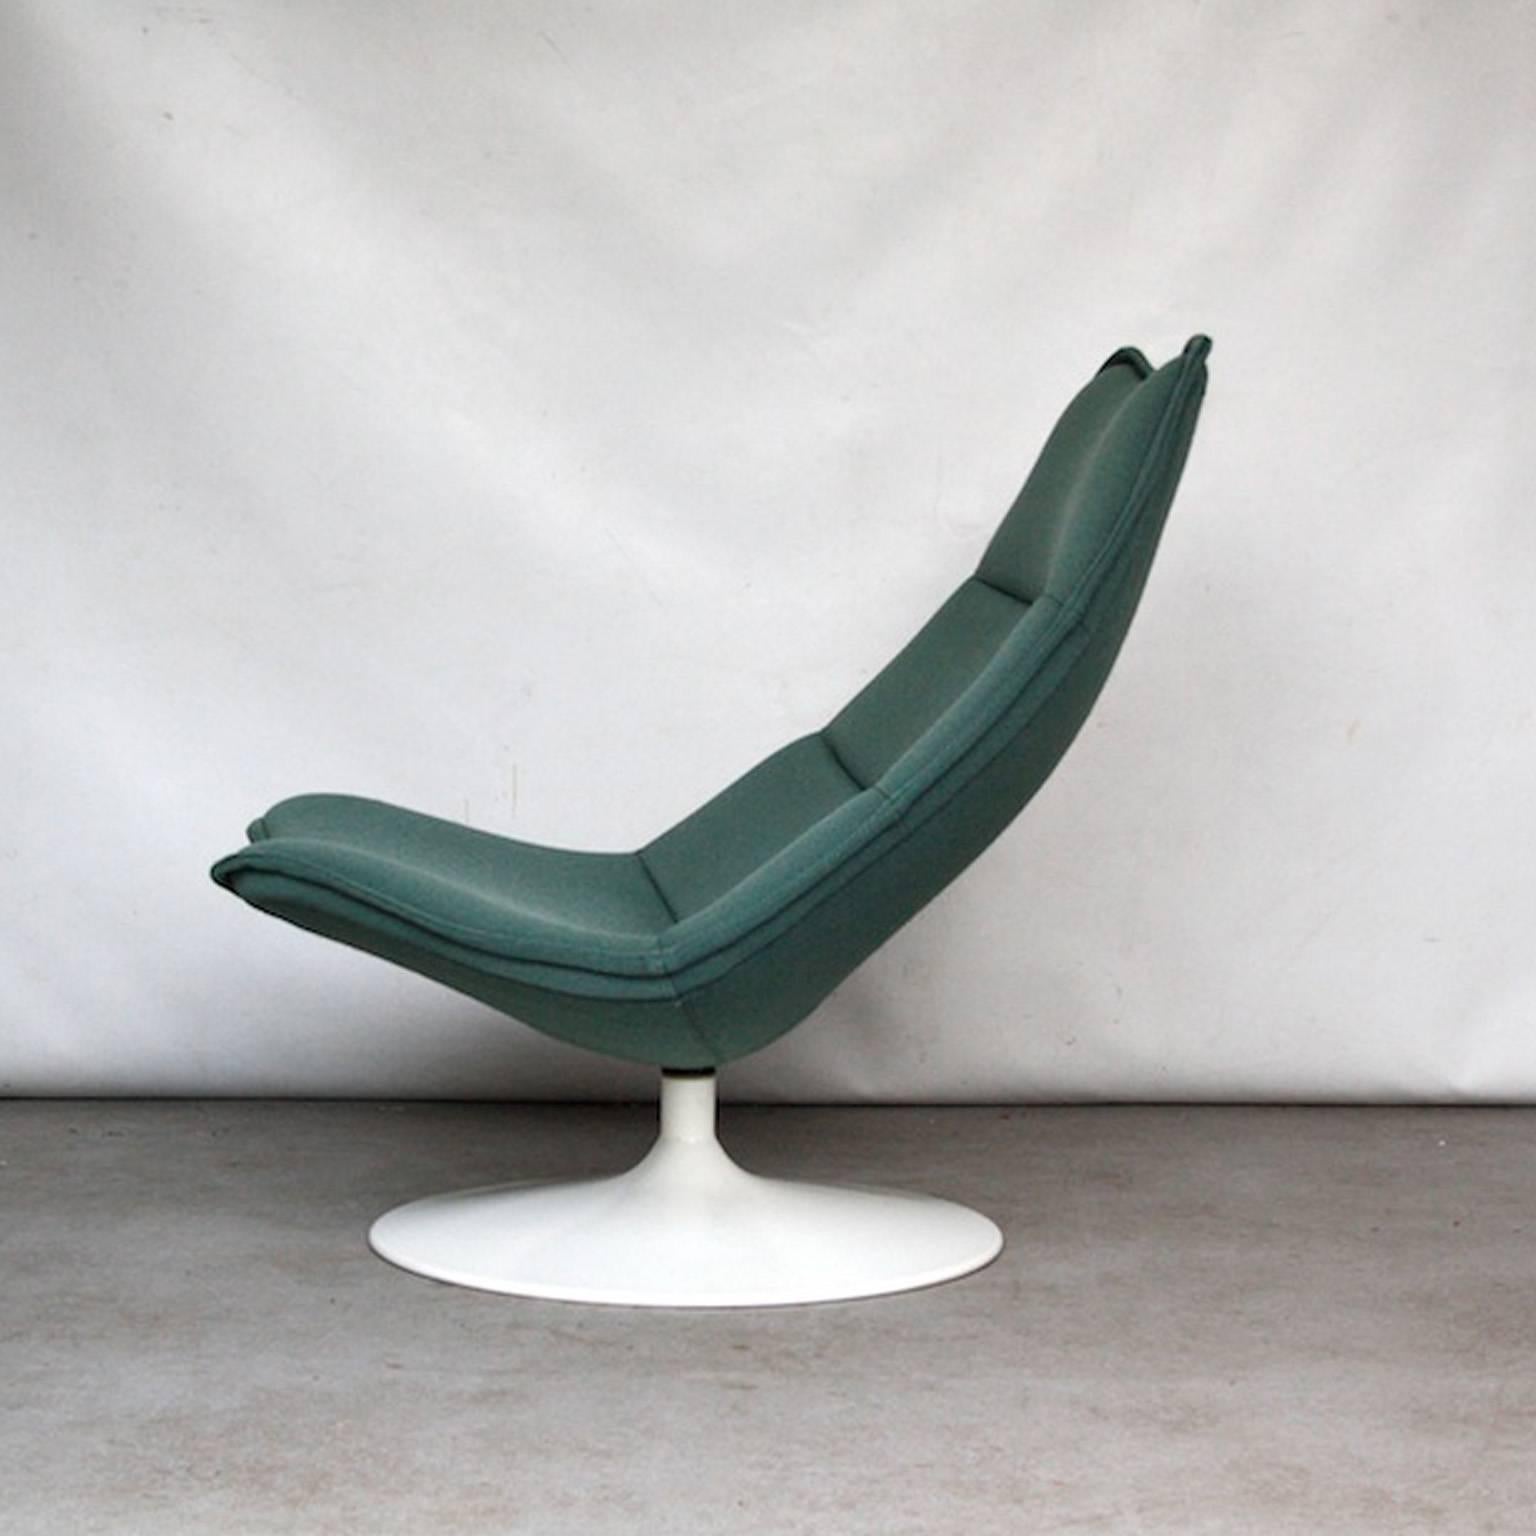 Stunning lounge chair from the 1970s by Harcourt in very good condition for its age. The chair has its original mint green fabric. The chair seems hardly used. It stands on a metal tulip base and can be swiveled 360 degrees.

Geoffrey Harcourt